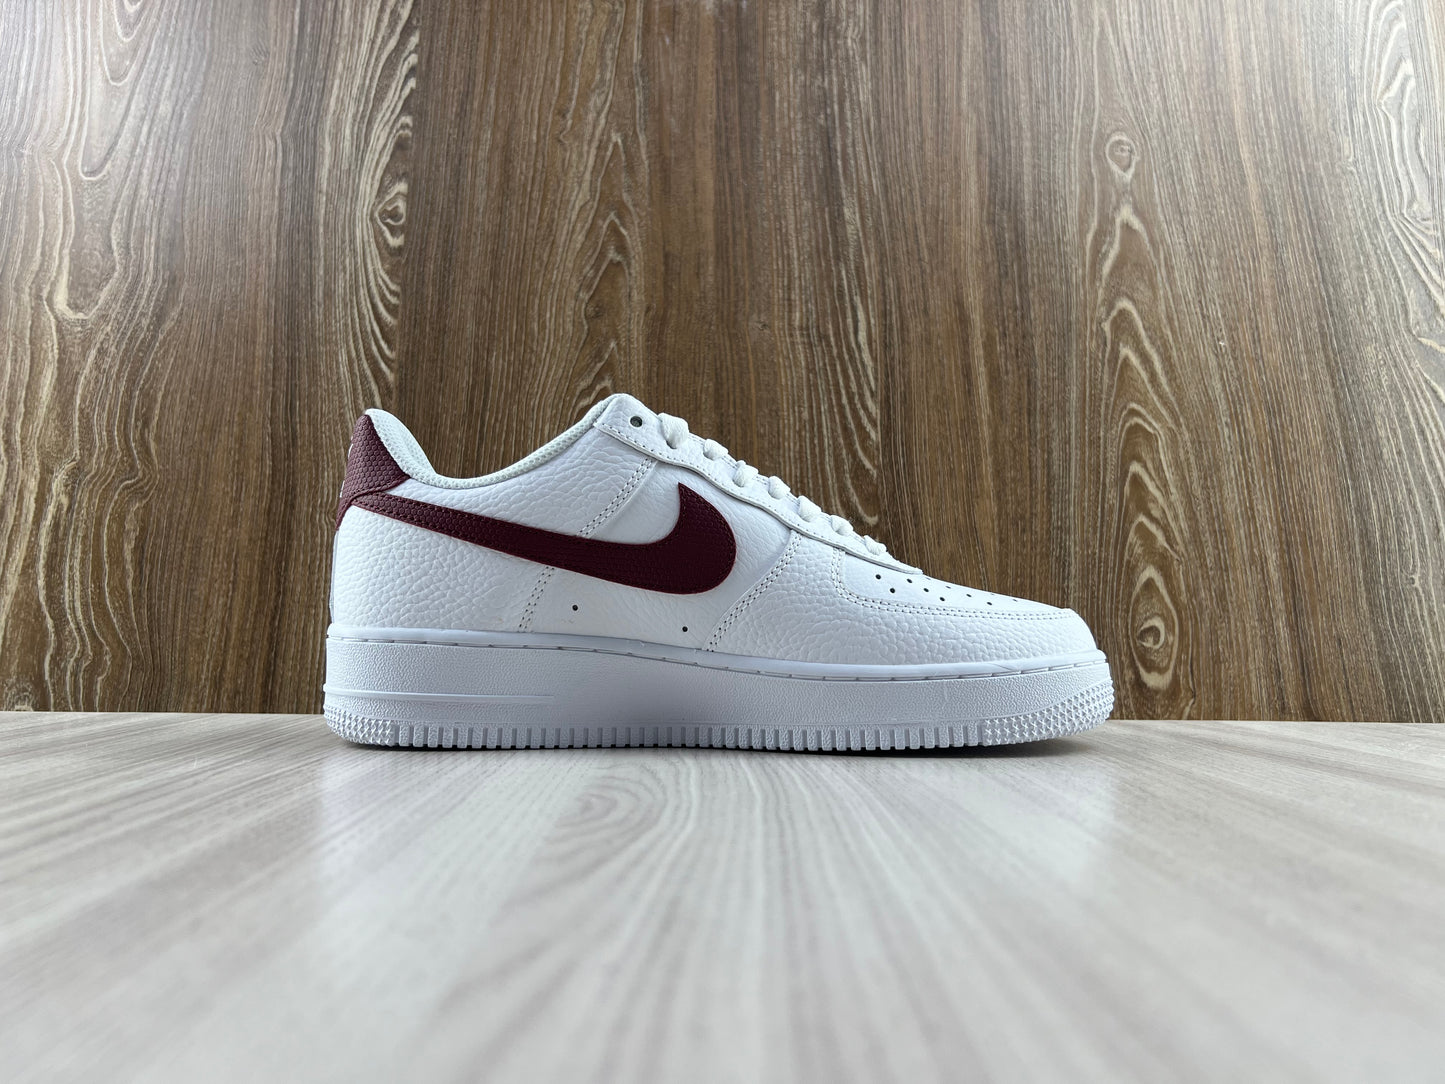 AirForce 1